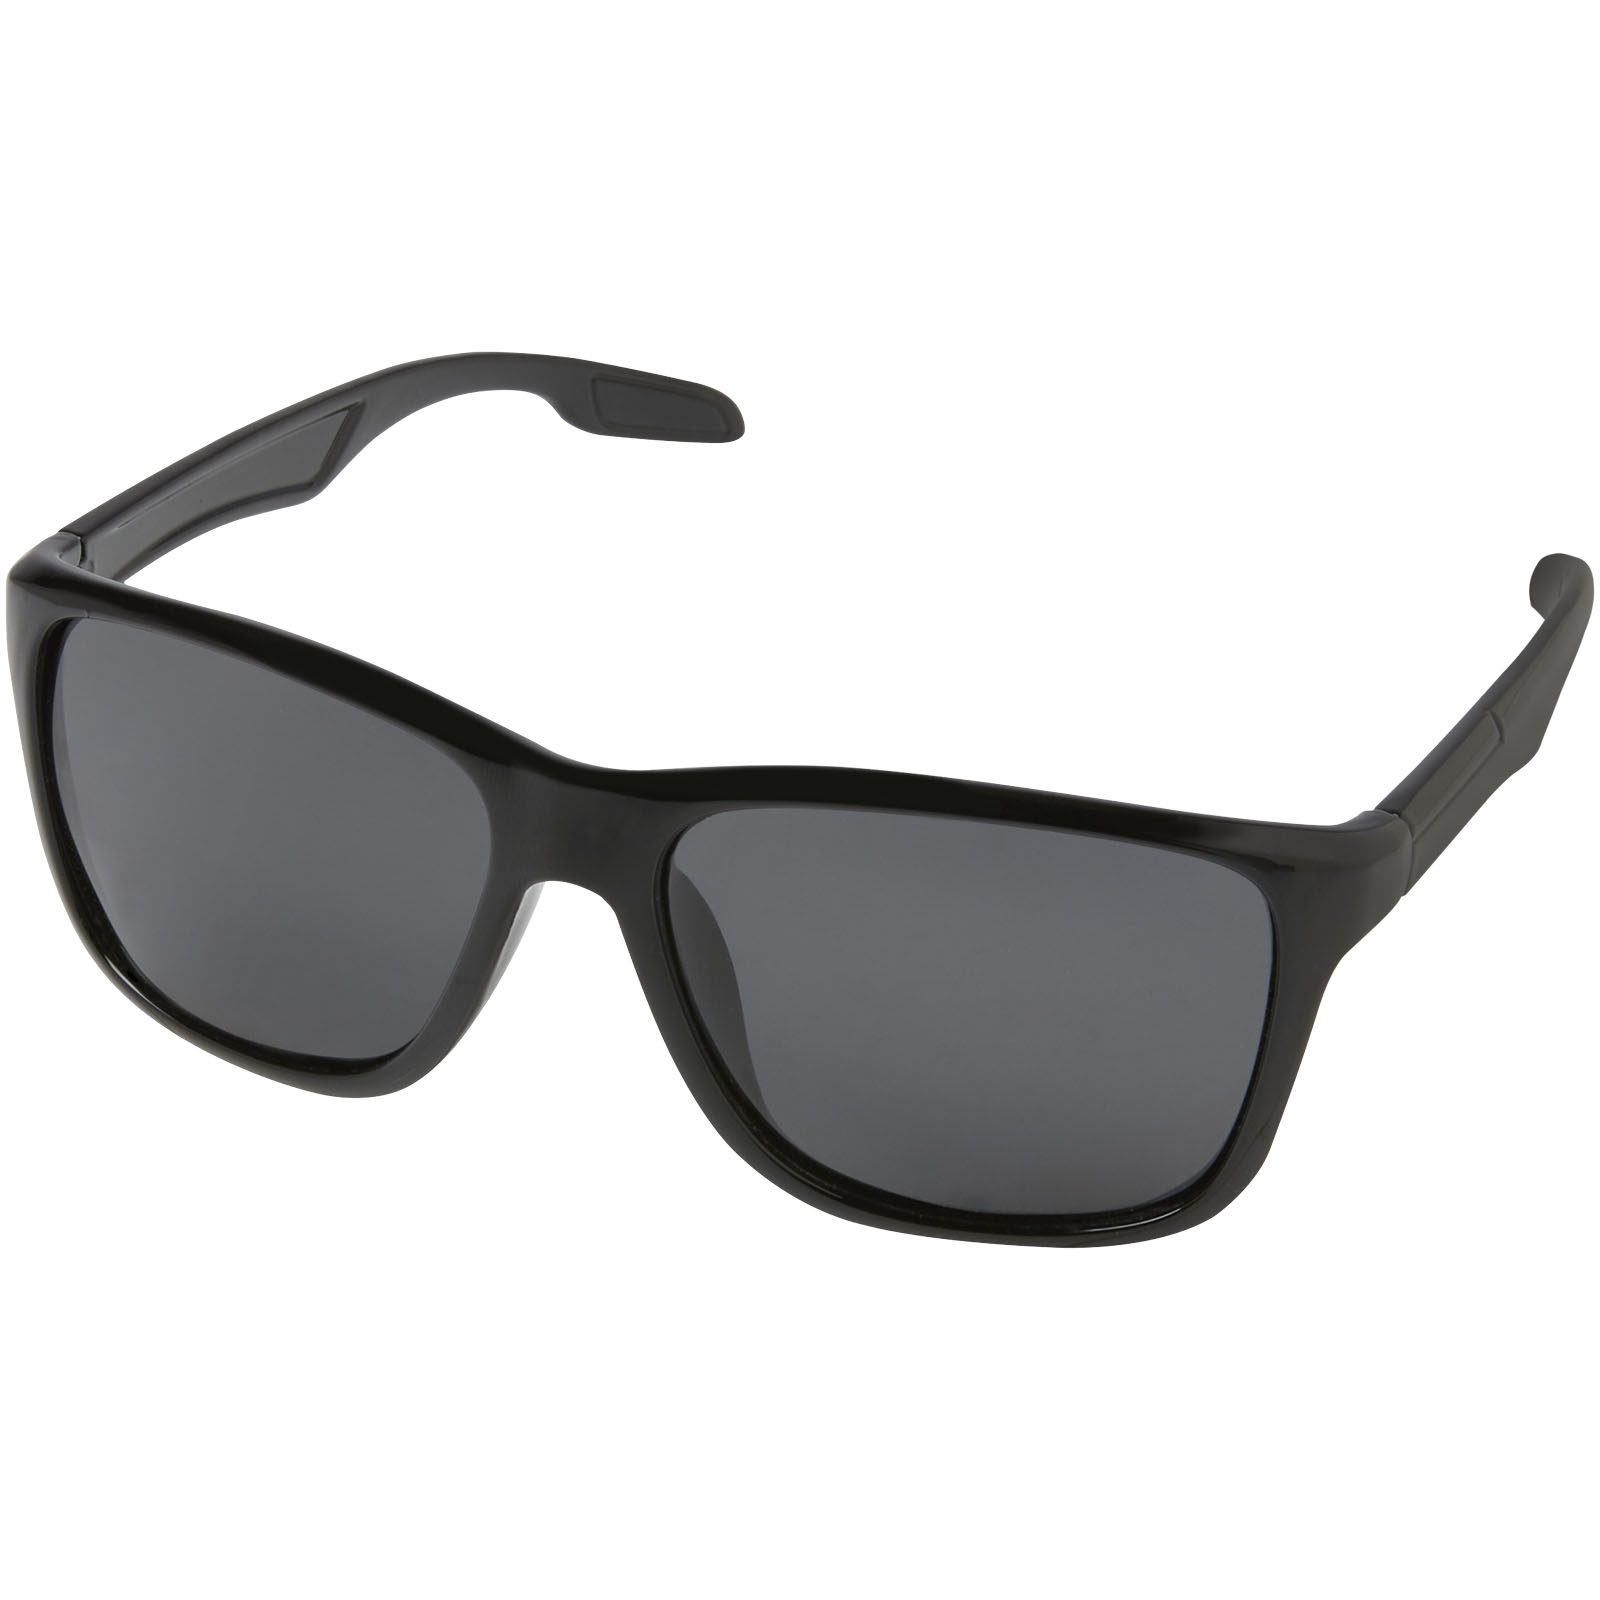 Advertising Sunglasses - Eiger polarized sunglasses in recycled PET casing